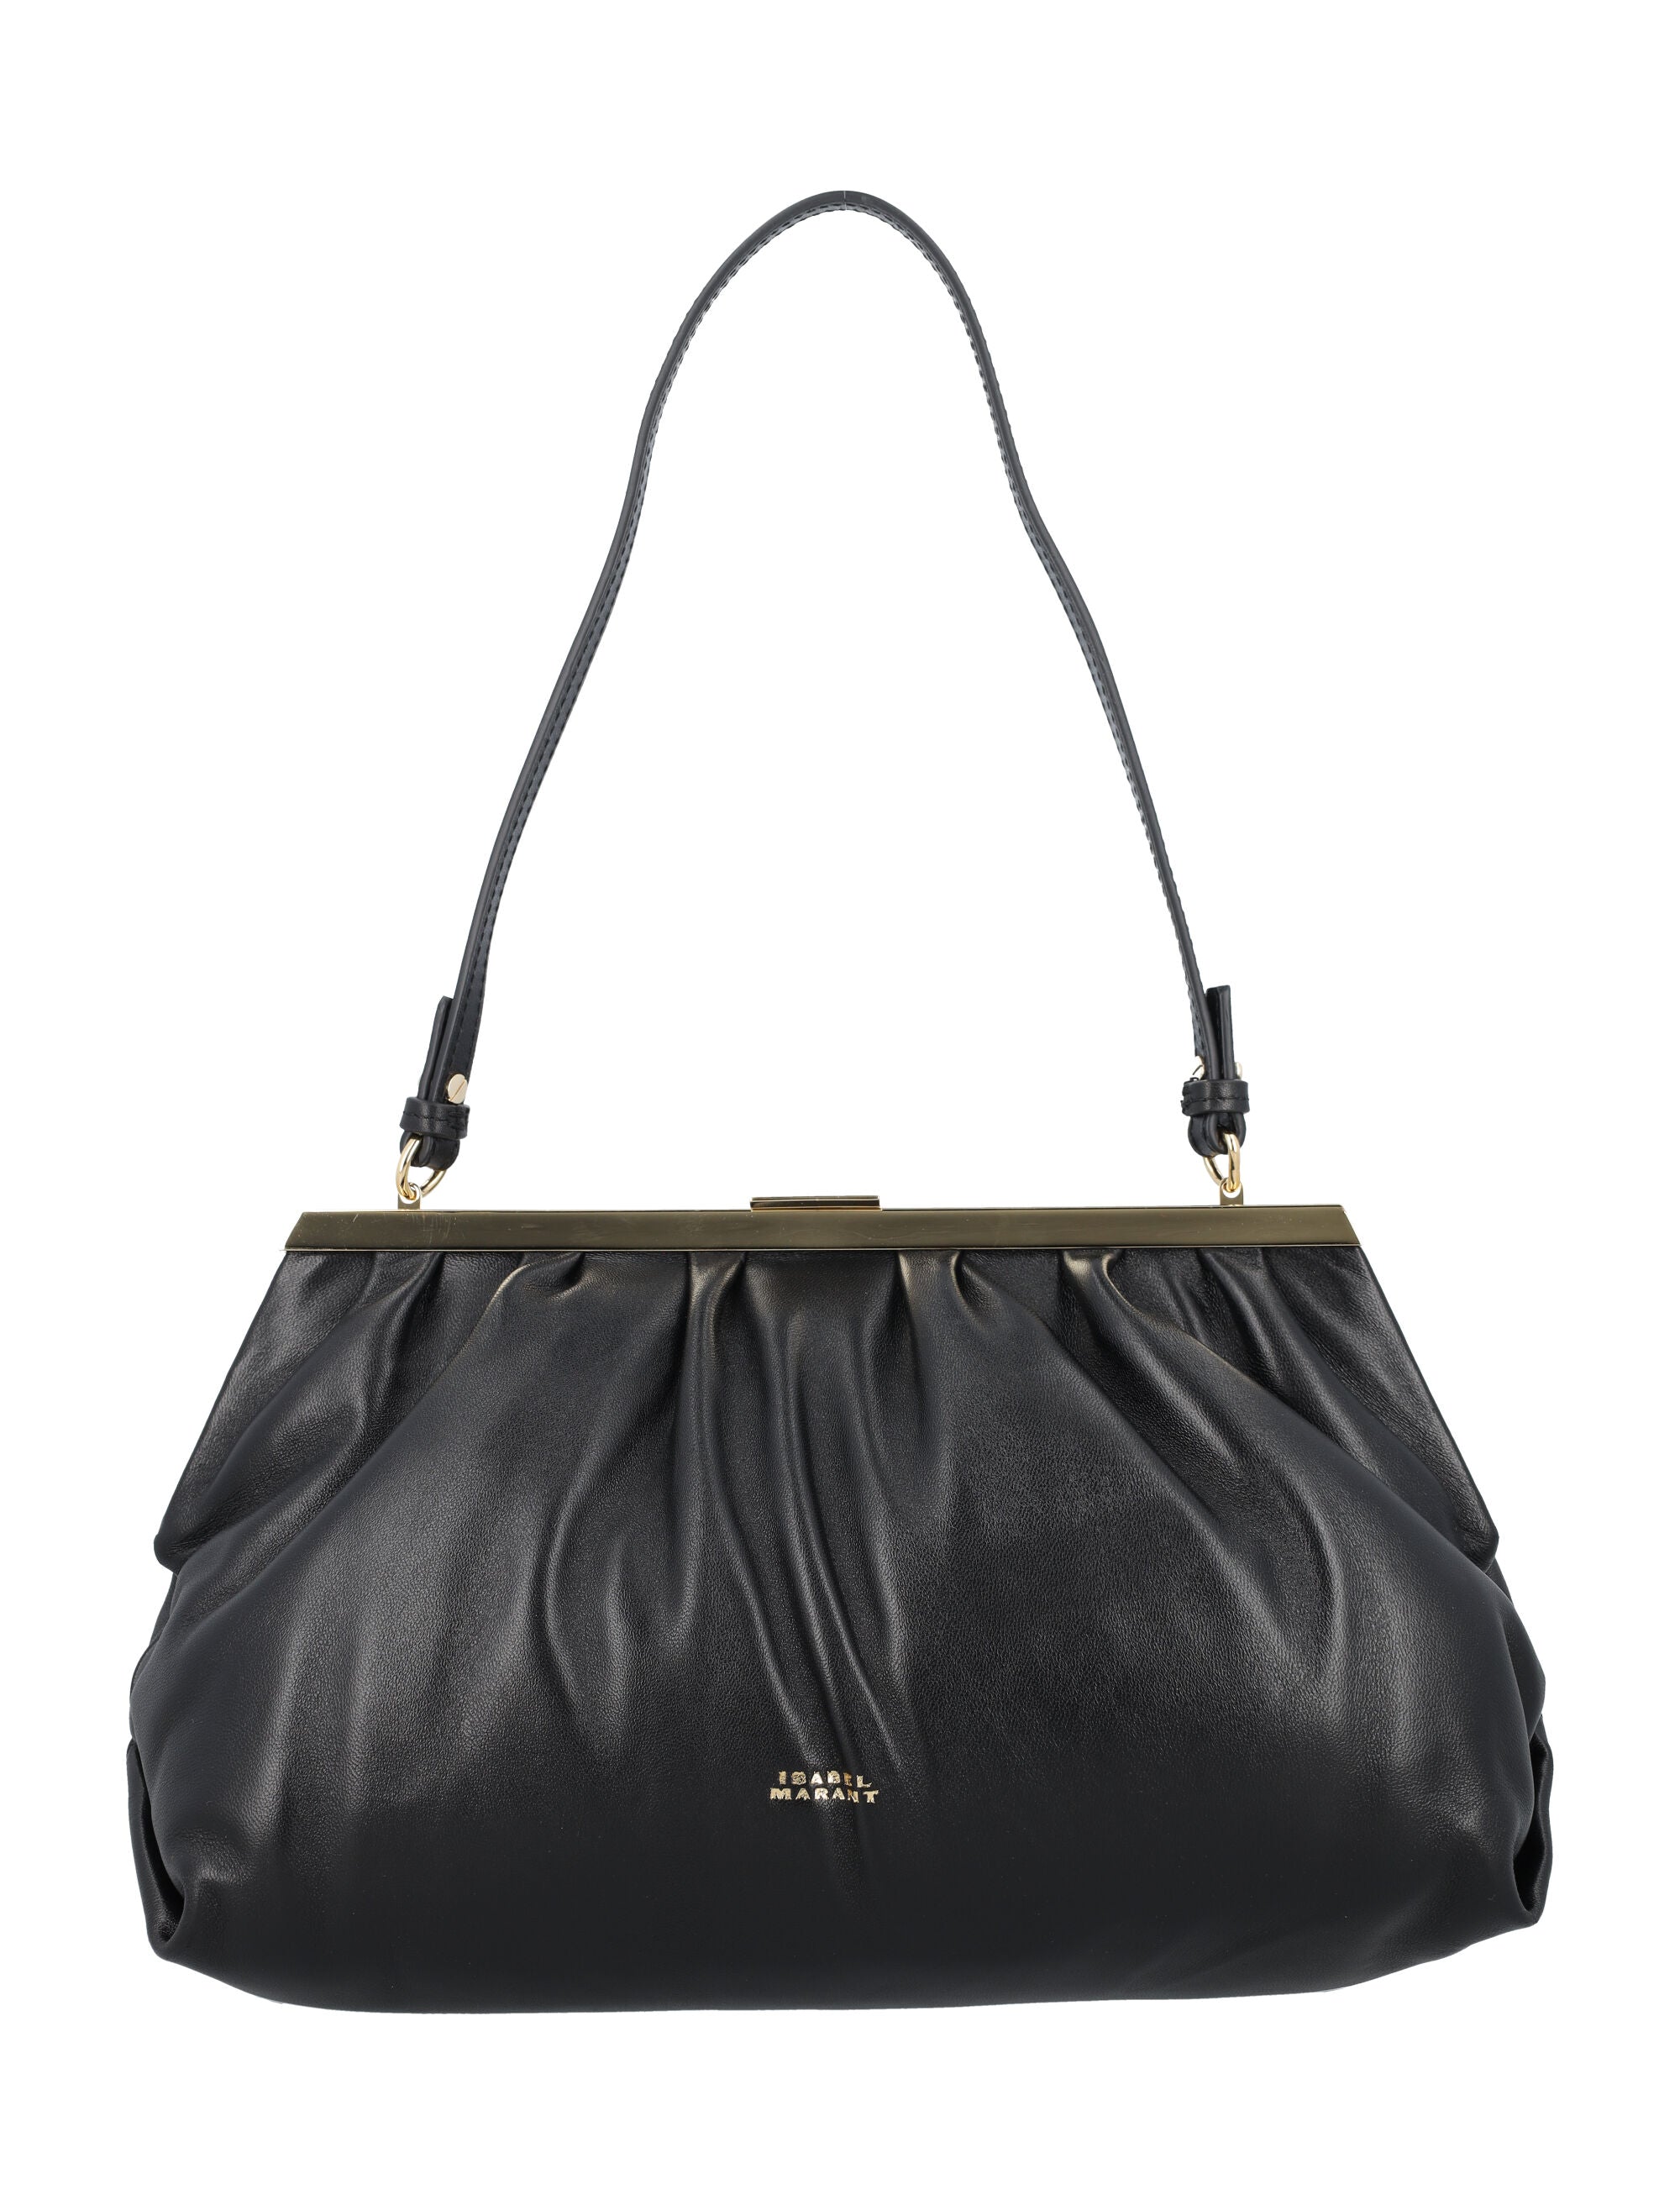 Isabel Marant Black Leather Handbag With Removable Strap And Gold-tone Details